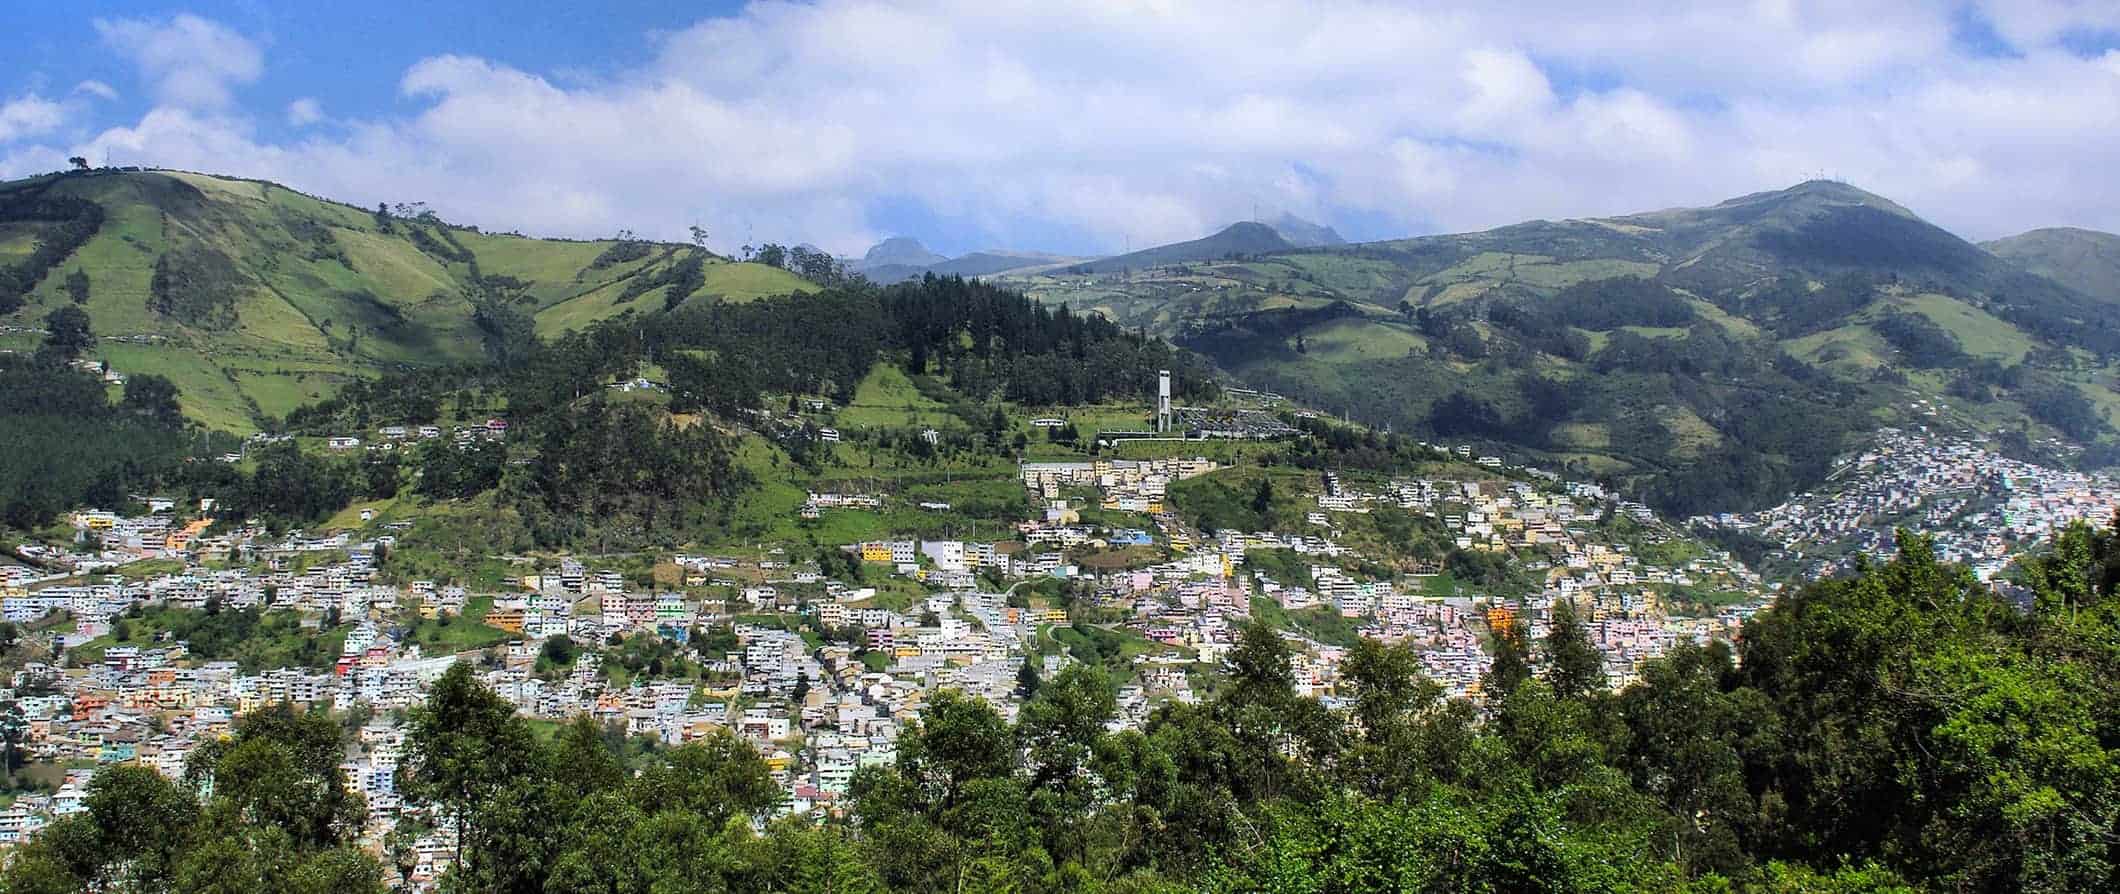 an aerial view of Quito, Ecuador surrounded by green hills